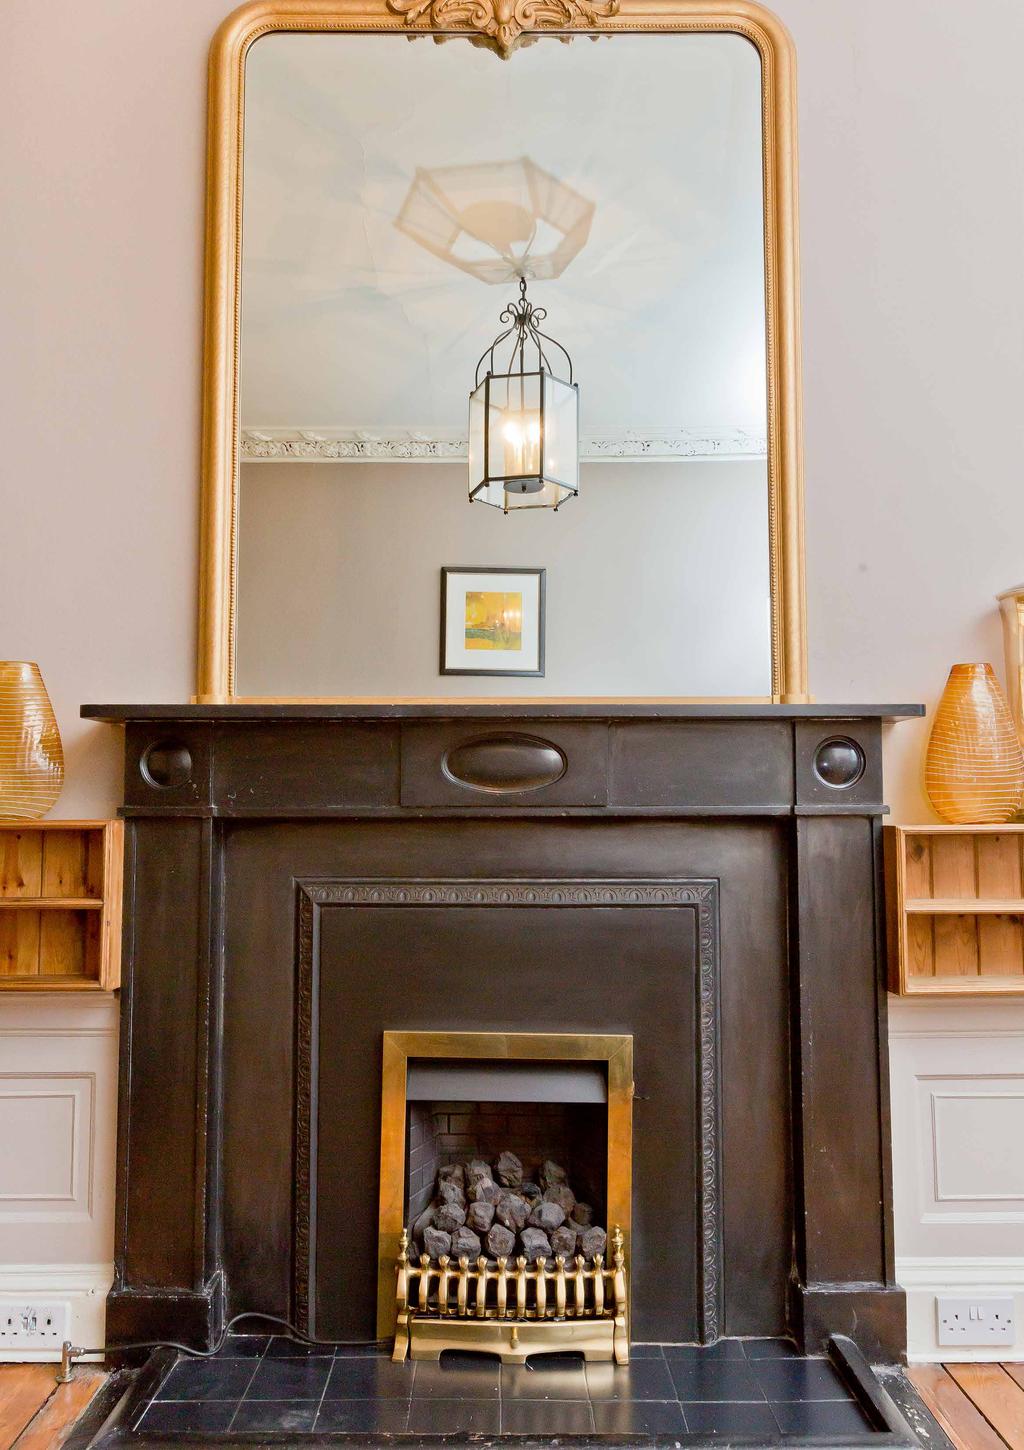 the striking fireplace. 10 CULLERTONSPROPERTY.CO.